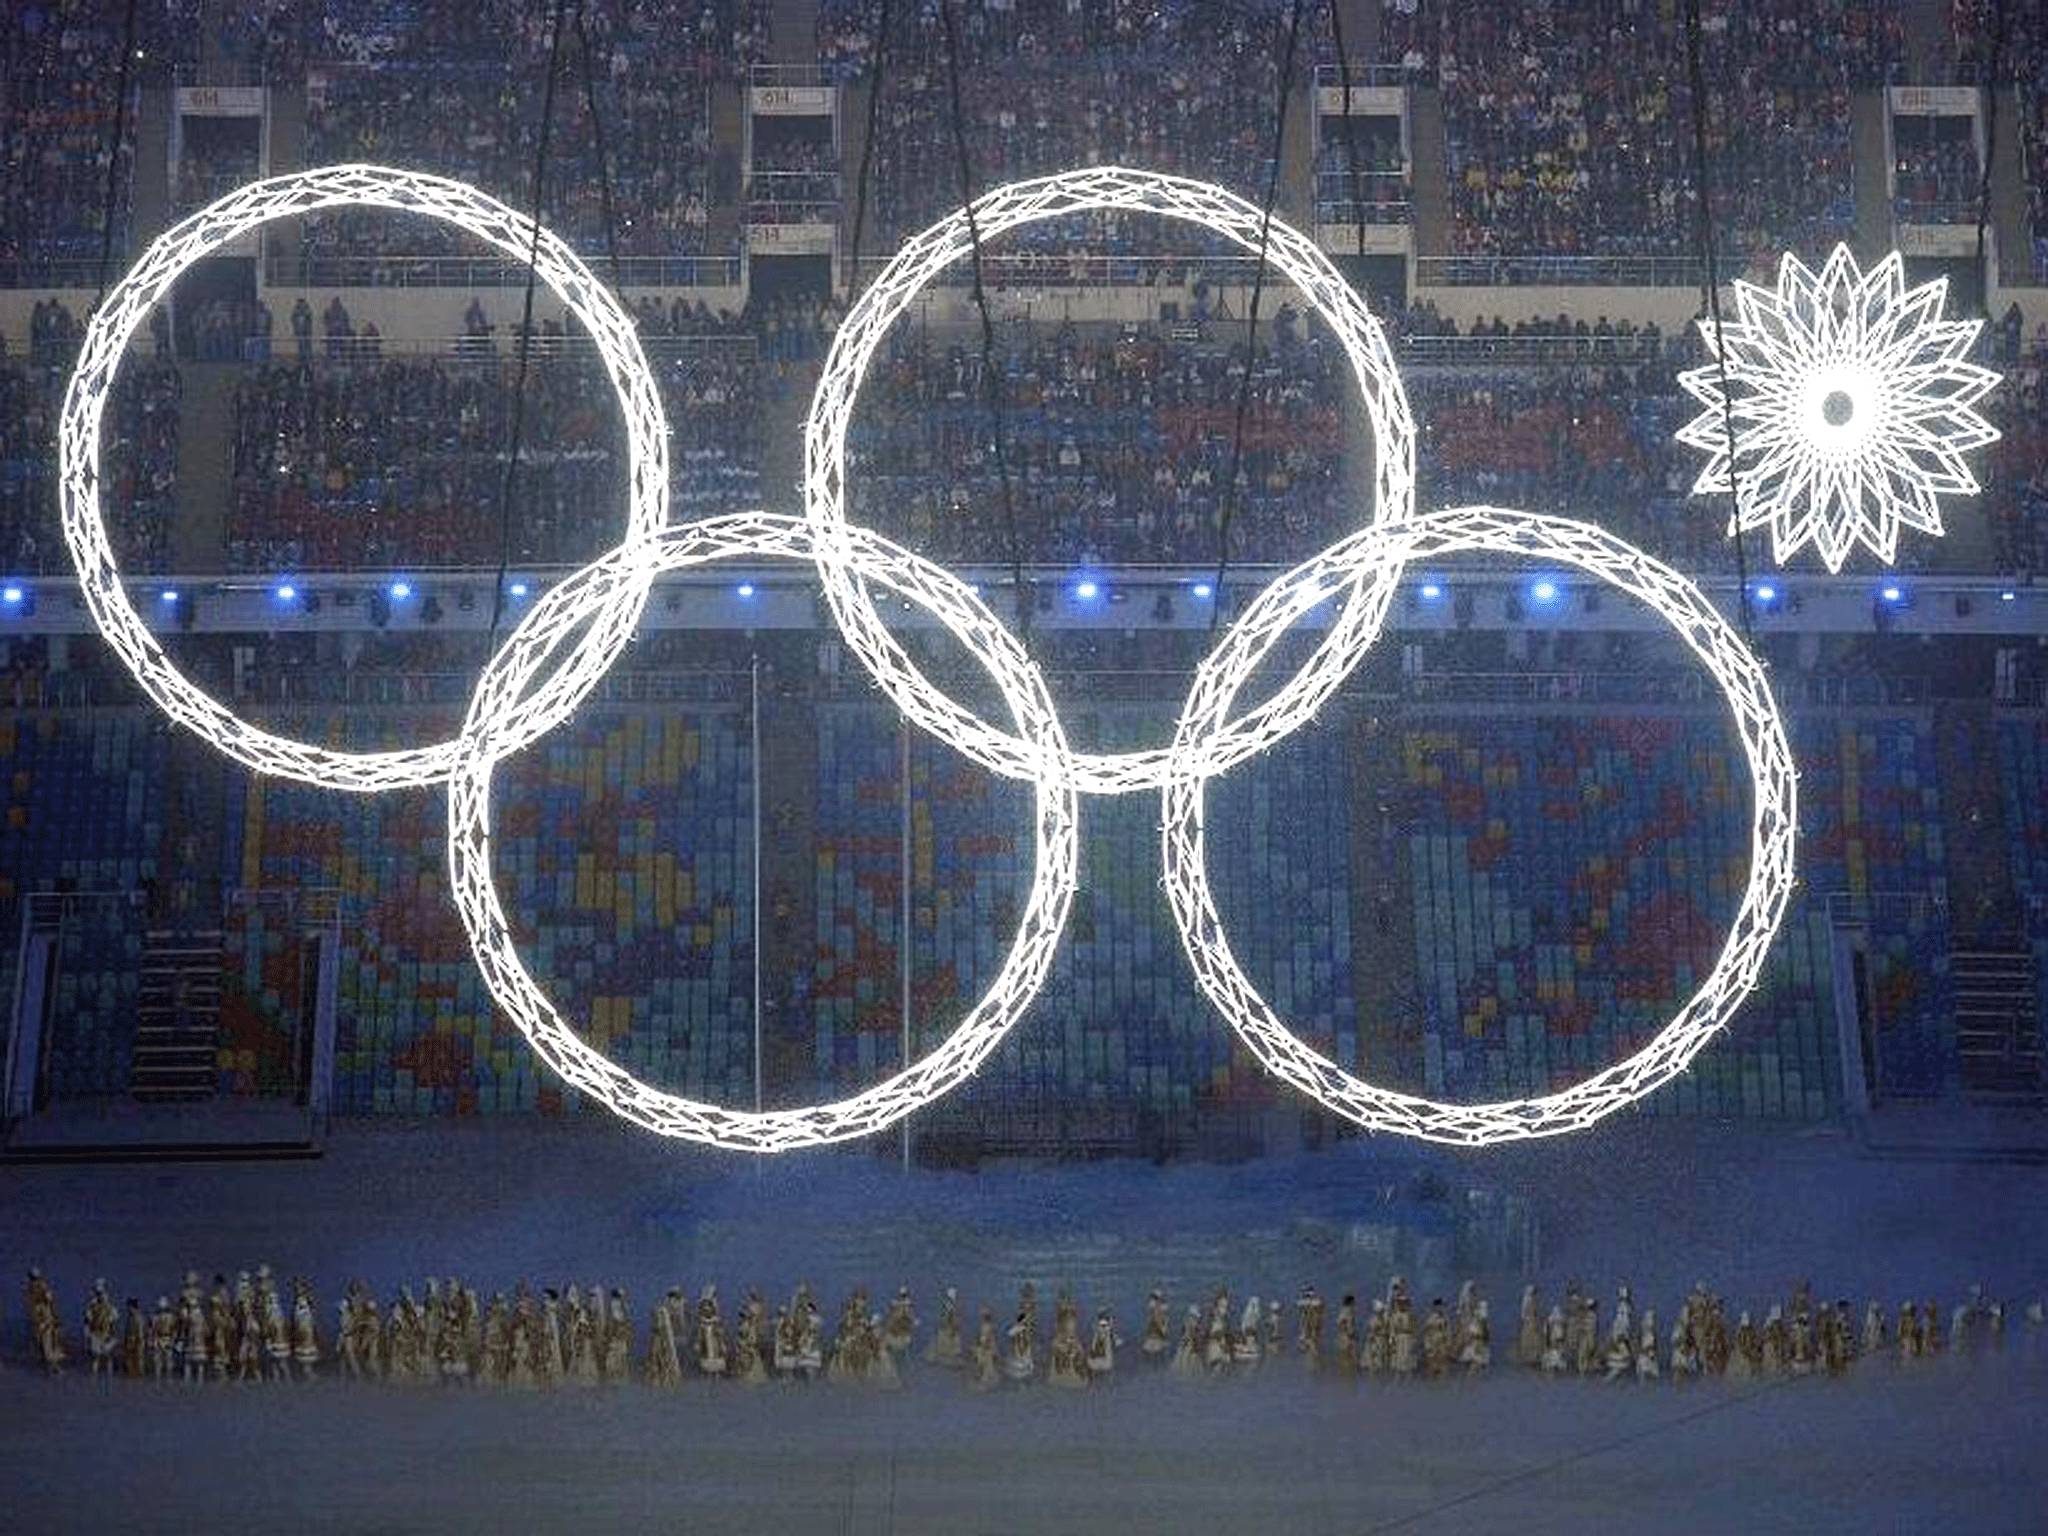 The Olympic Rings as presented by Sochi 2014